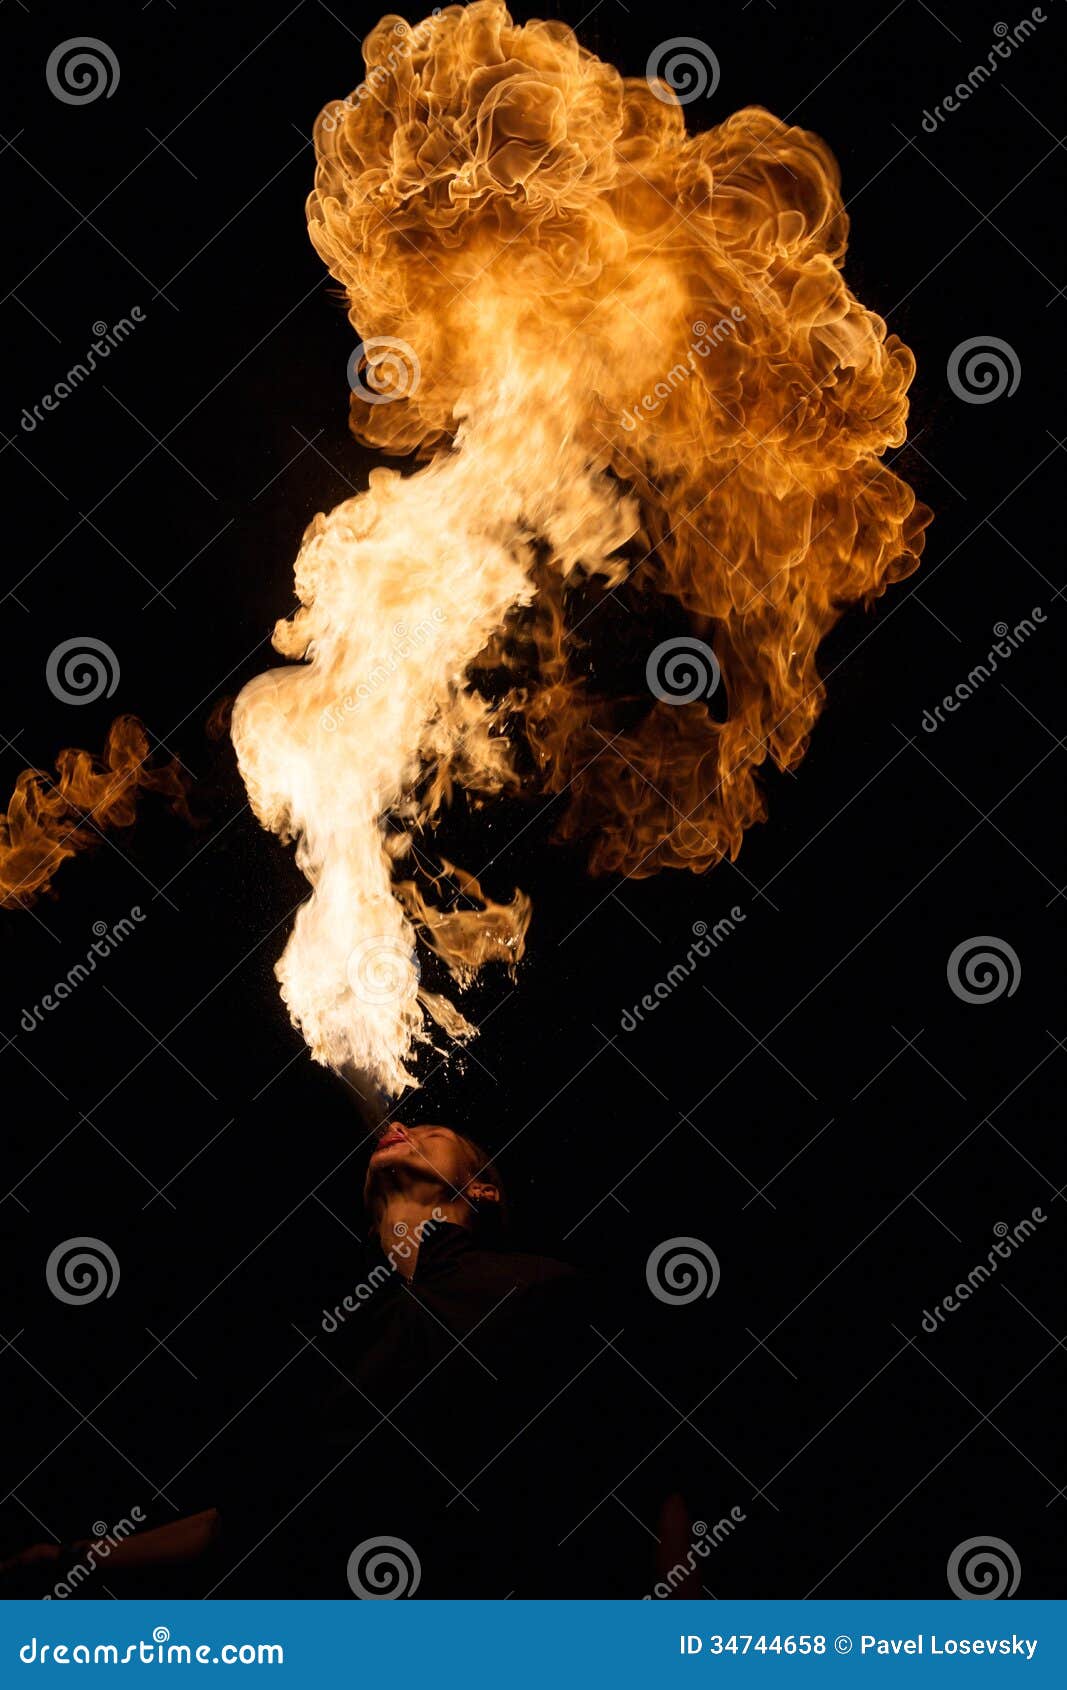 fakir breathes spurts of flame